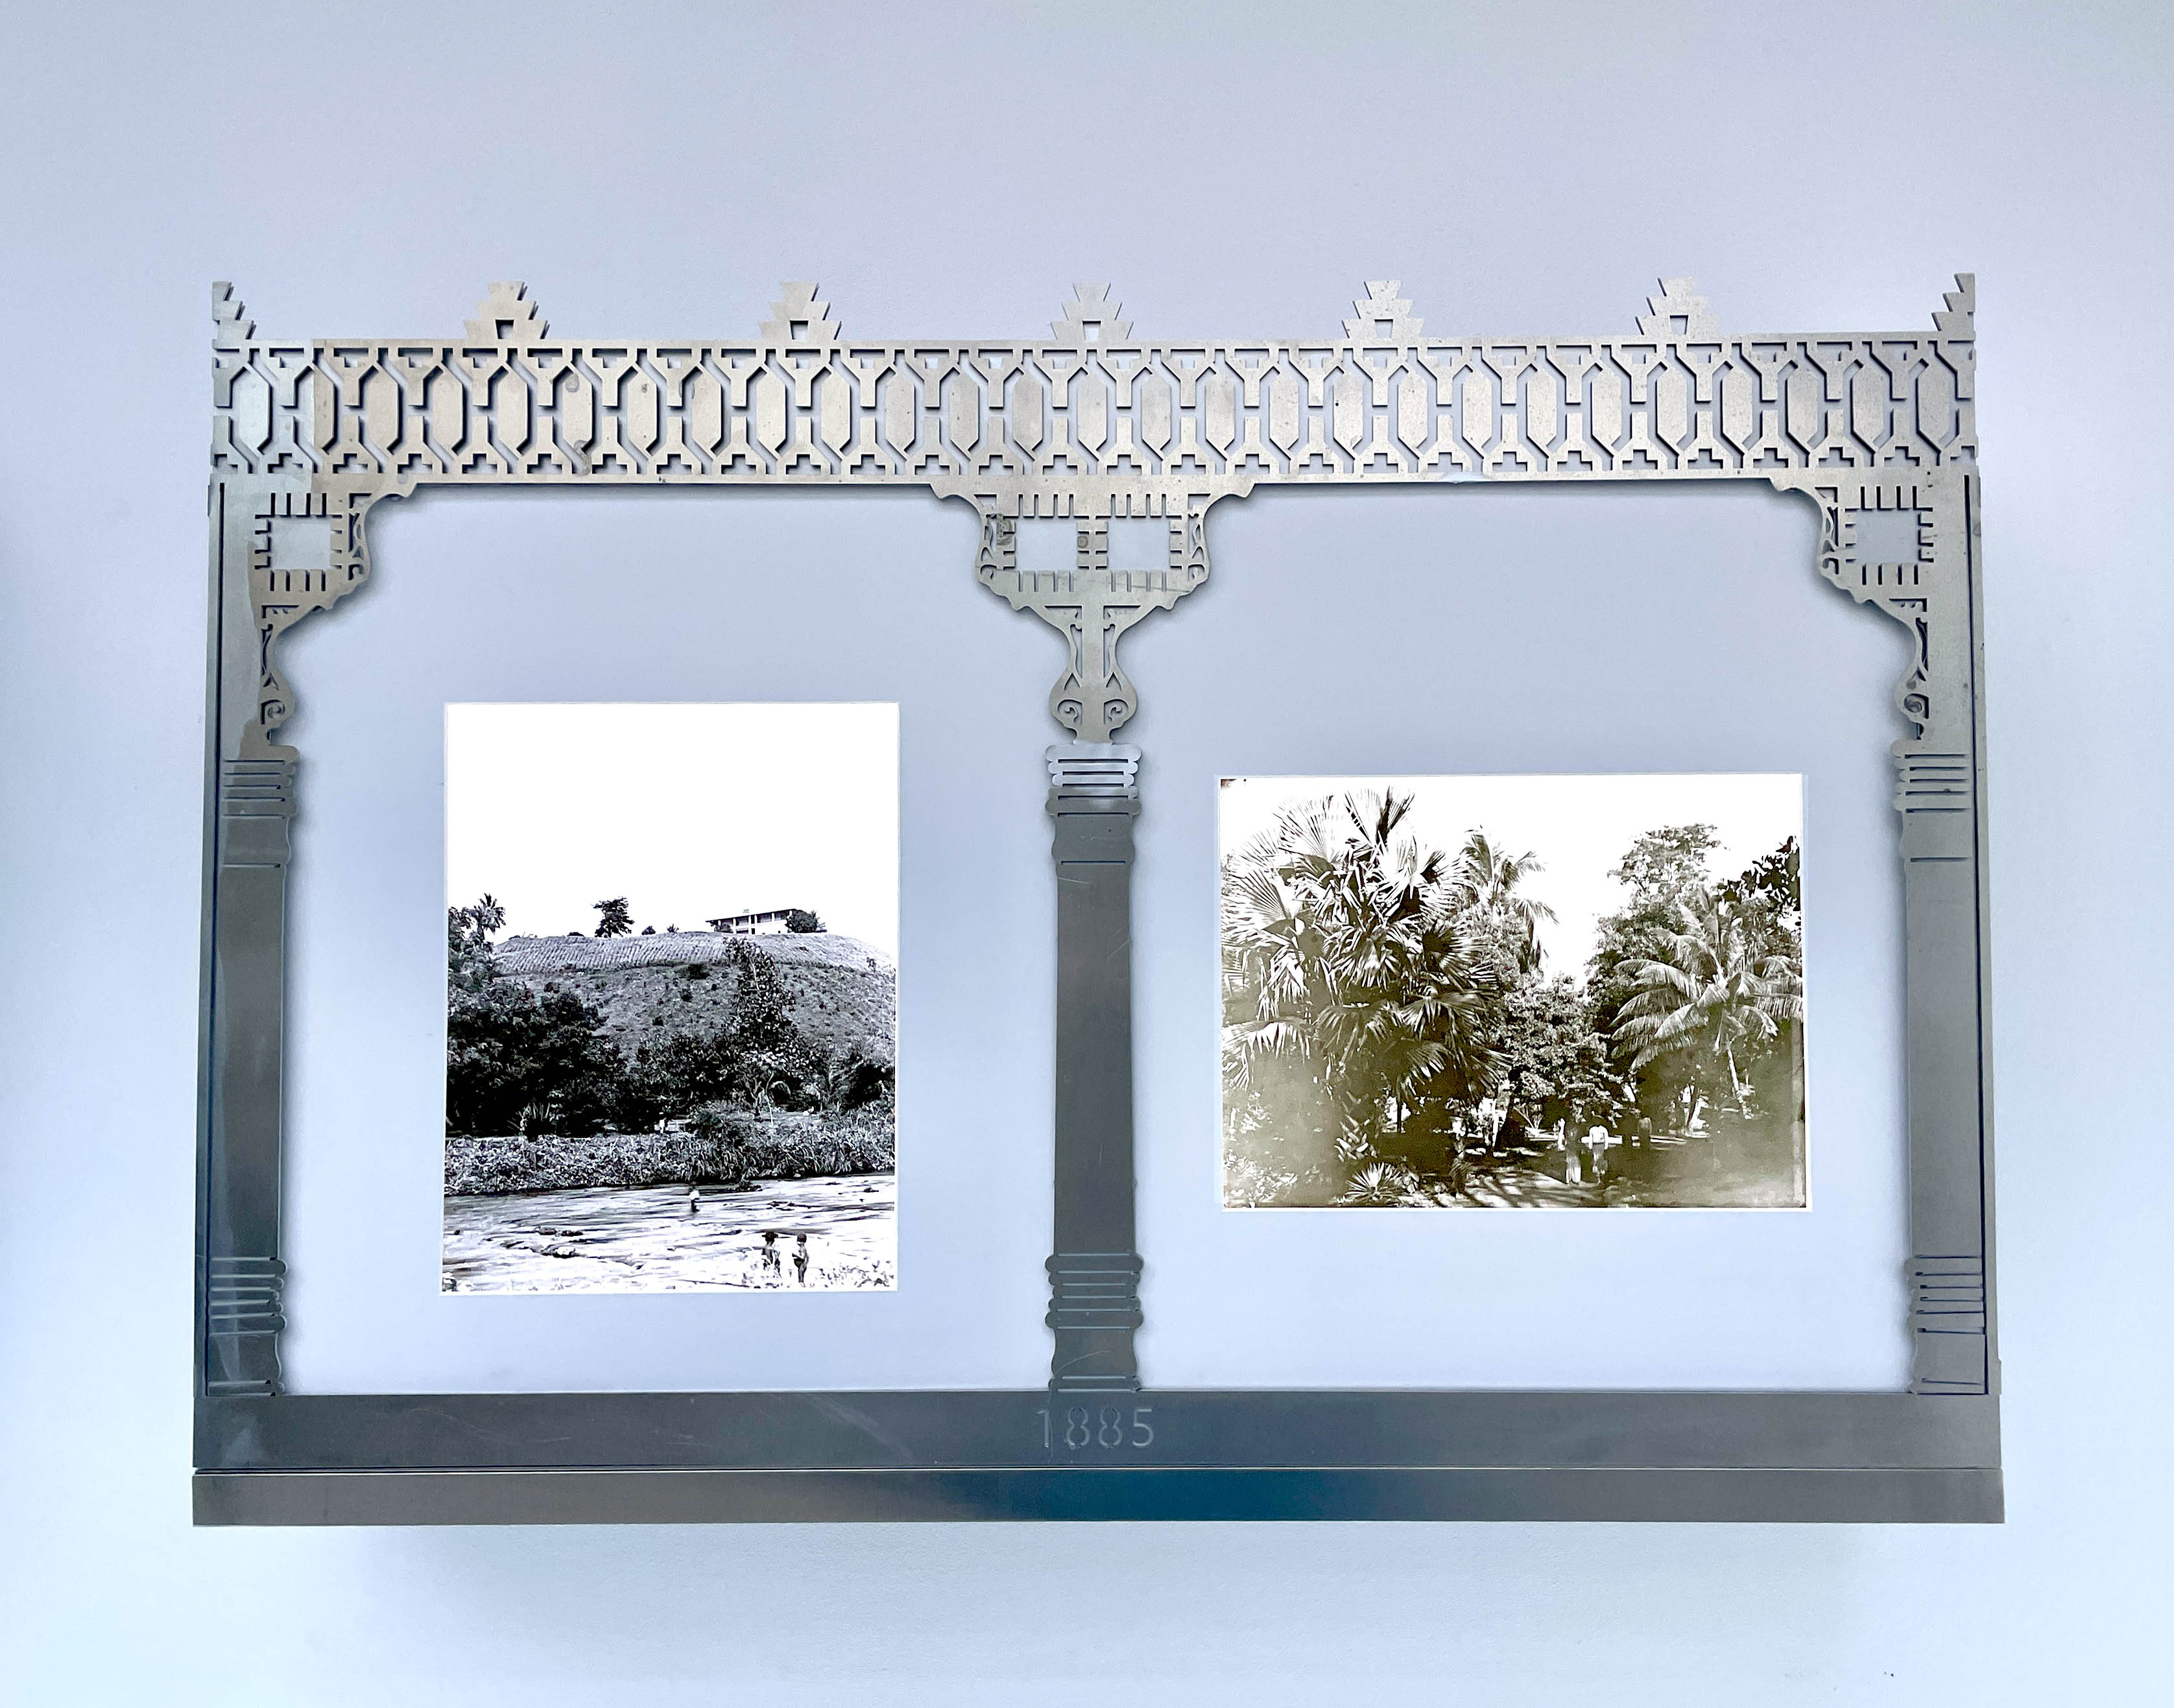 An decorative, laser-cut aluminum frame sits in front of two black and white, back-lit archival images of plants. The archival images show the Limbe Botanical Garden in Cameroon in the early 20th century.